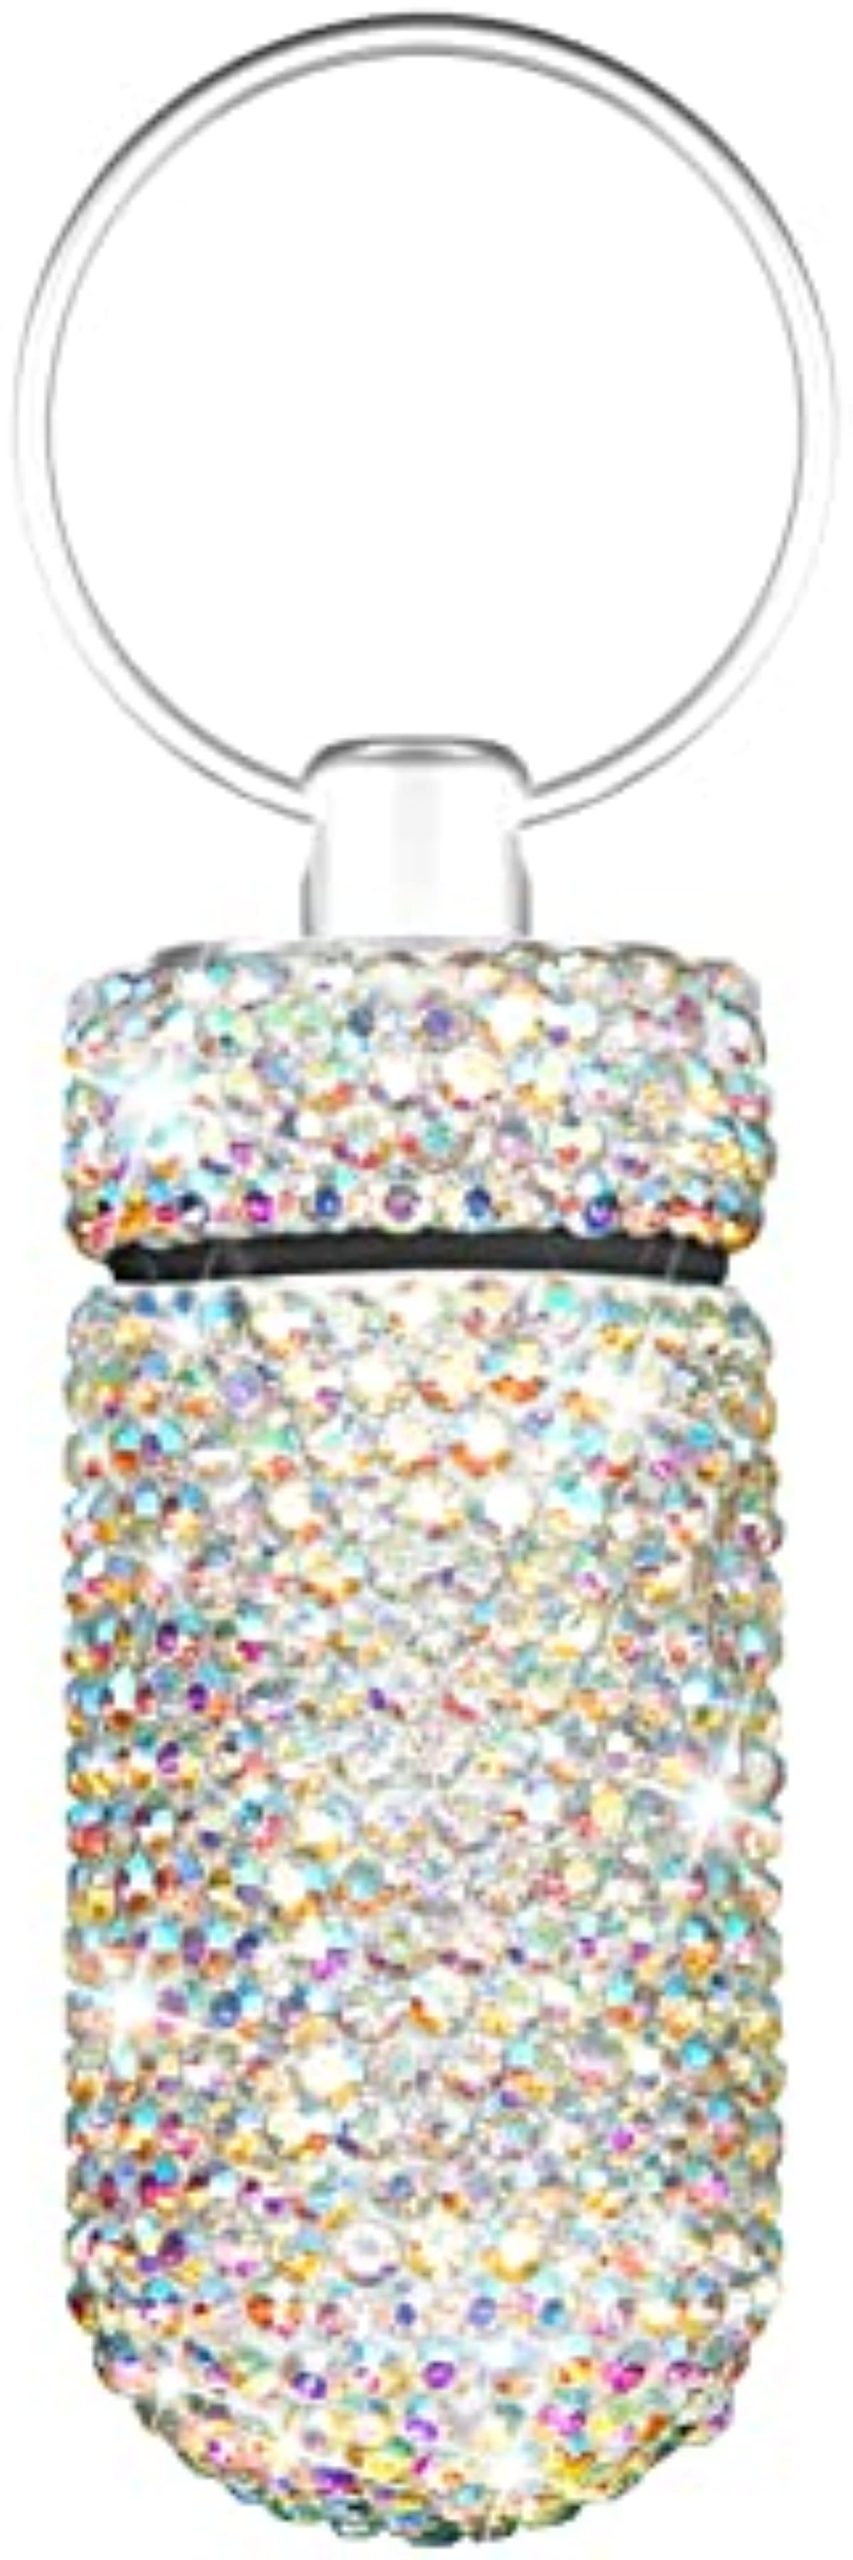 Yuchew Bling Pill Case Pill Container Rhinestone Pill Box Portable Waterproof Pocket Pill Holder Storage Bottle with Keychain for Travel, Outdoor, Camping (AB Color)